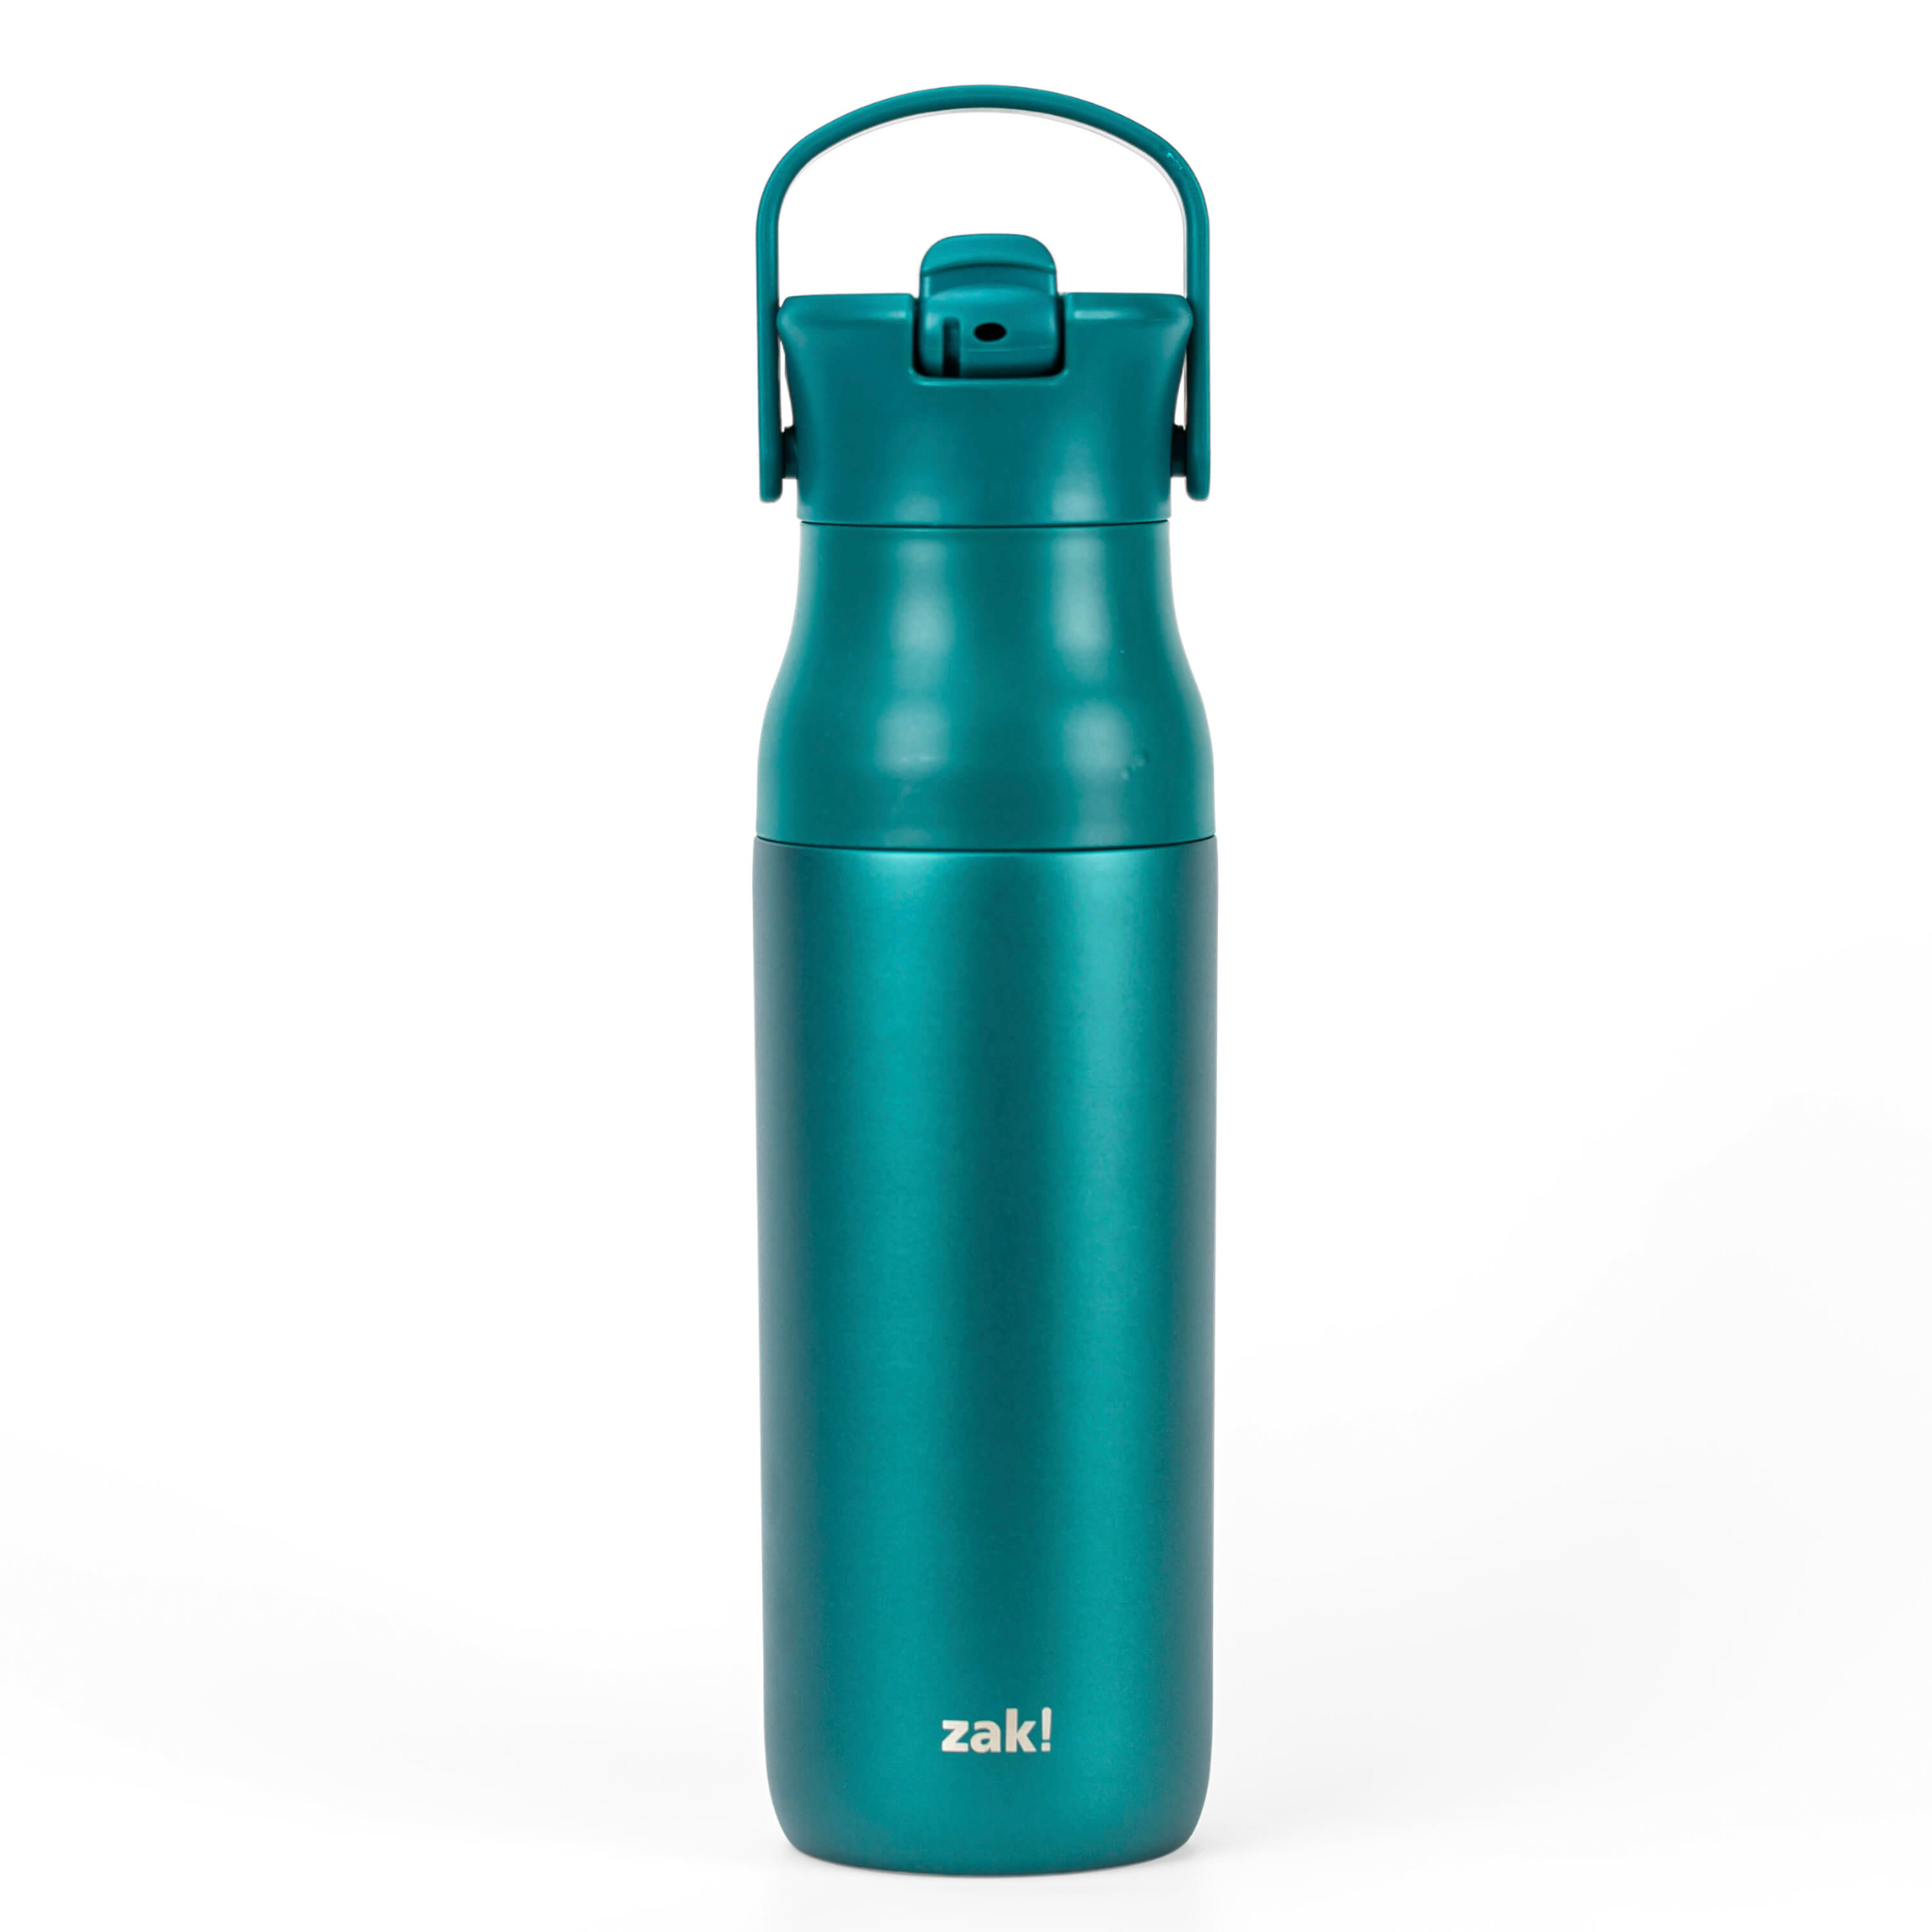 Harmony Recycled Stainless Steel Insulated Water Bottle with Flip-Up Straw Spout - Emerald, 32 ounces